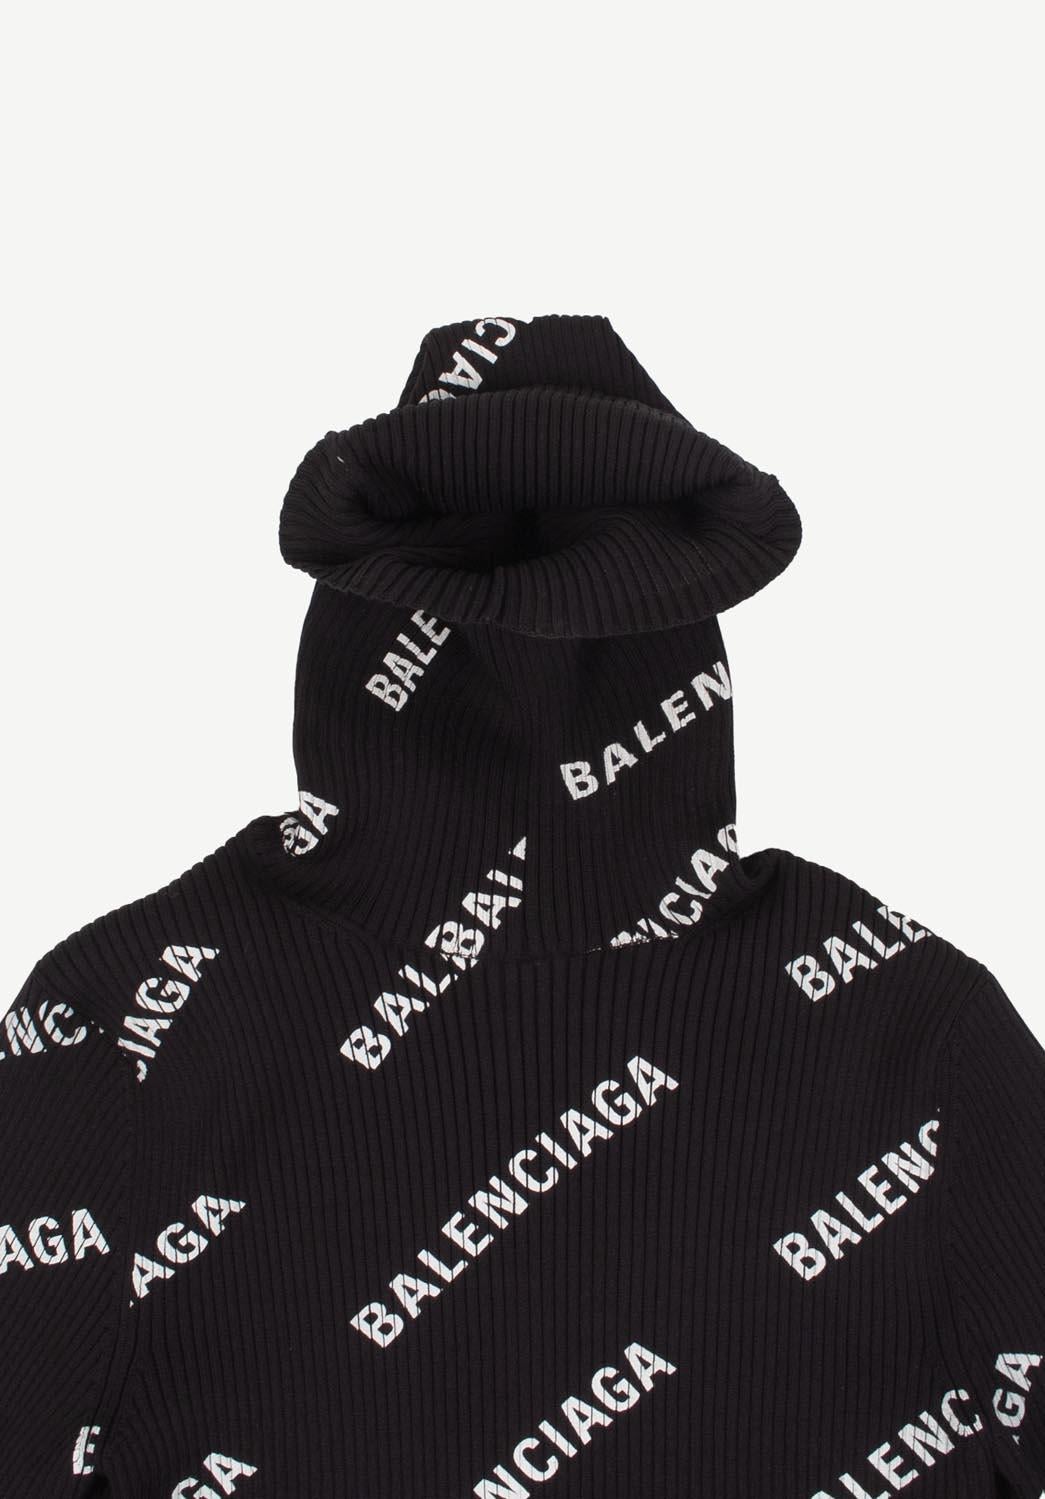 Item for sale is 100% genuine Balenciaga Stretch High Neck Women Sweater, S275
Color: Black
(An actual color may a bit vary due to individual computer screen interpretation)
Material: 100% polyamide
Tag size: XS 
This sweater is great quality item.